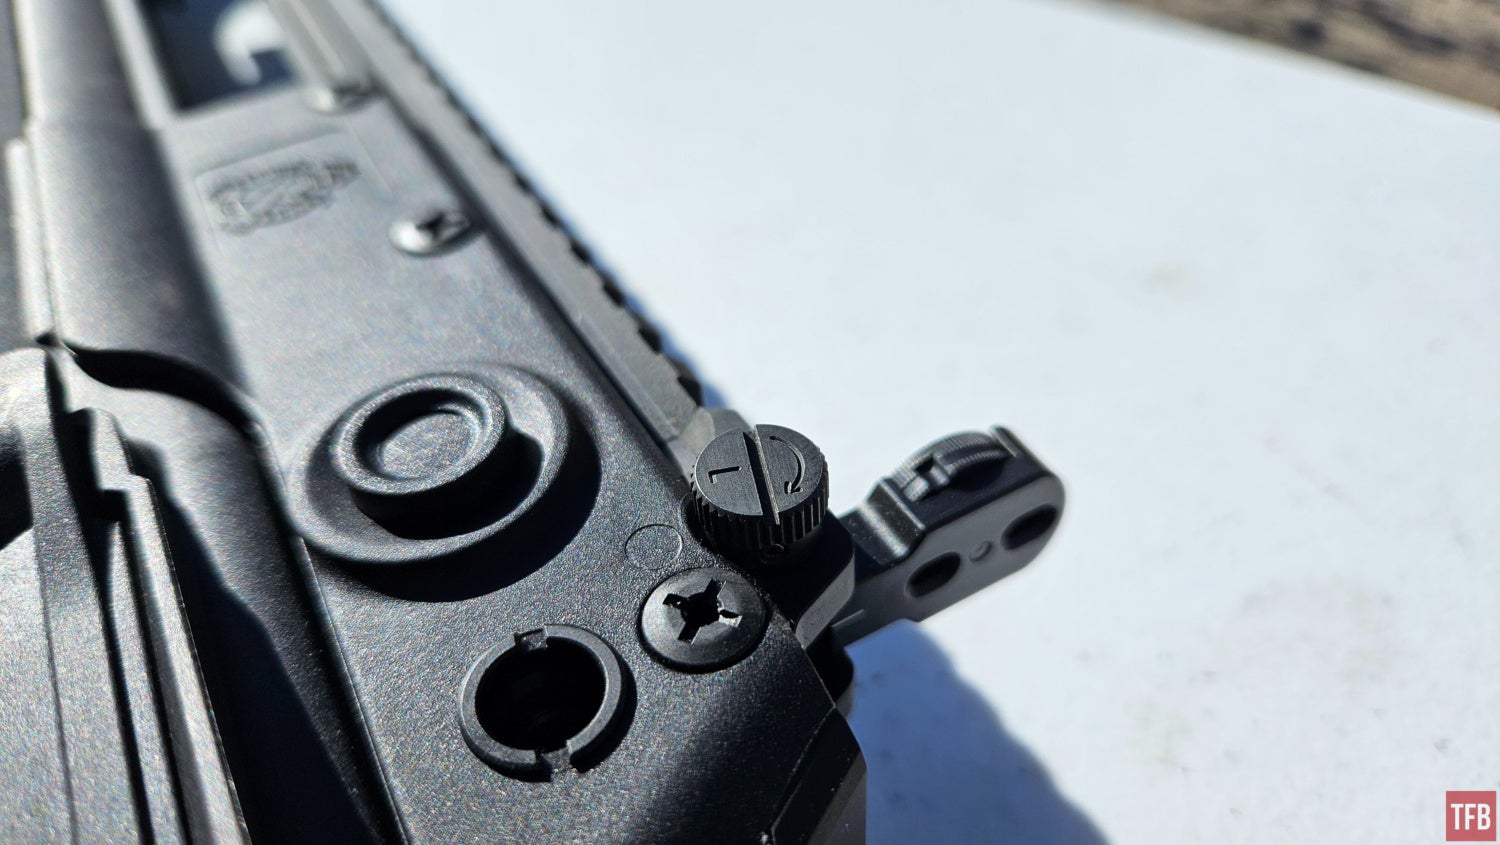 TFB Review: Springfield Armory Hellion 20-inch (Part 2)